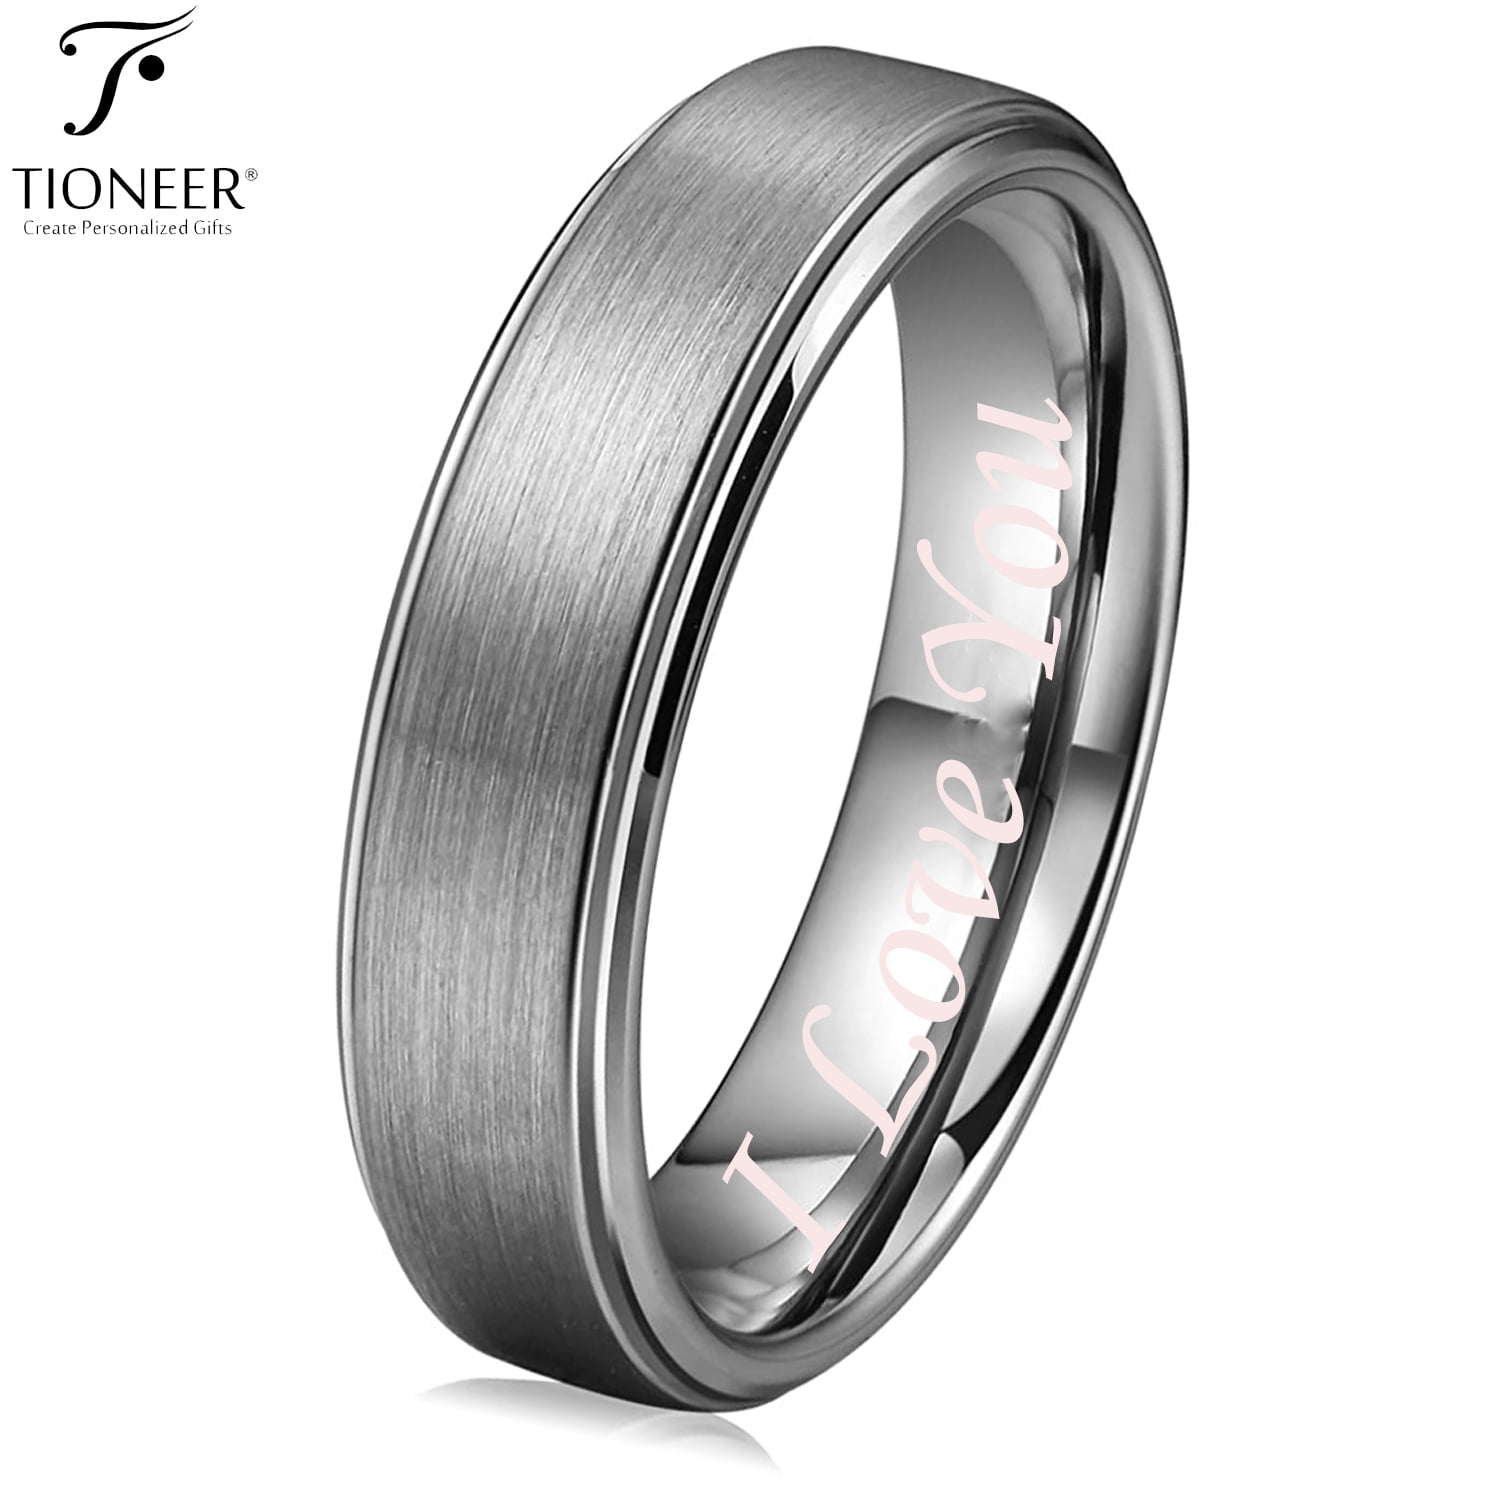 8mm TUNGSTEN CARBIDE DOMED BRUSH FINISHED MEN'S C/FIT  WEDDING BAND RING SZ 5-15 